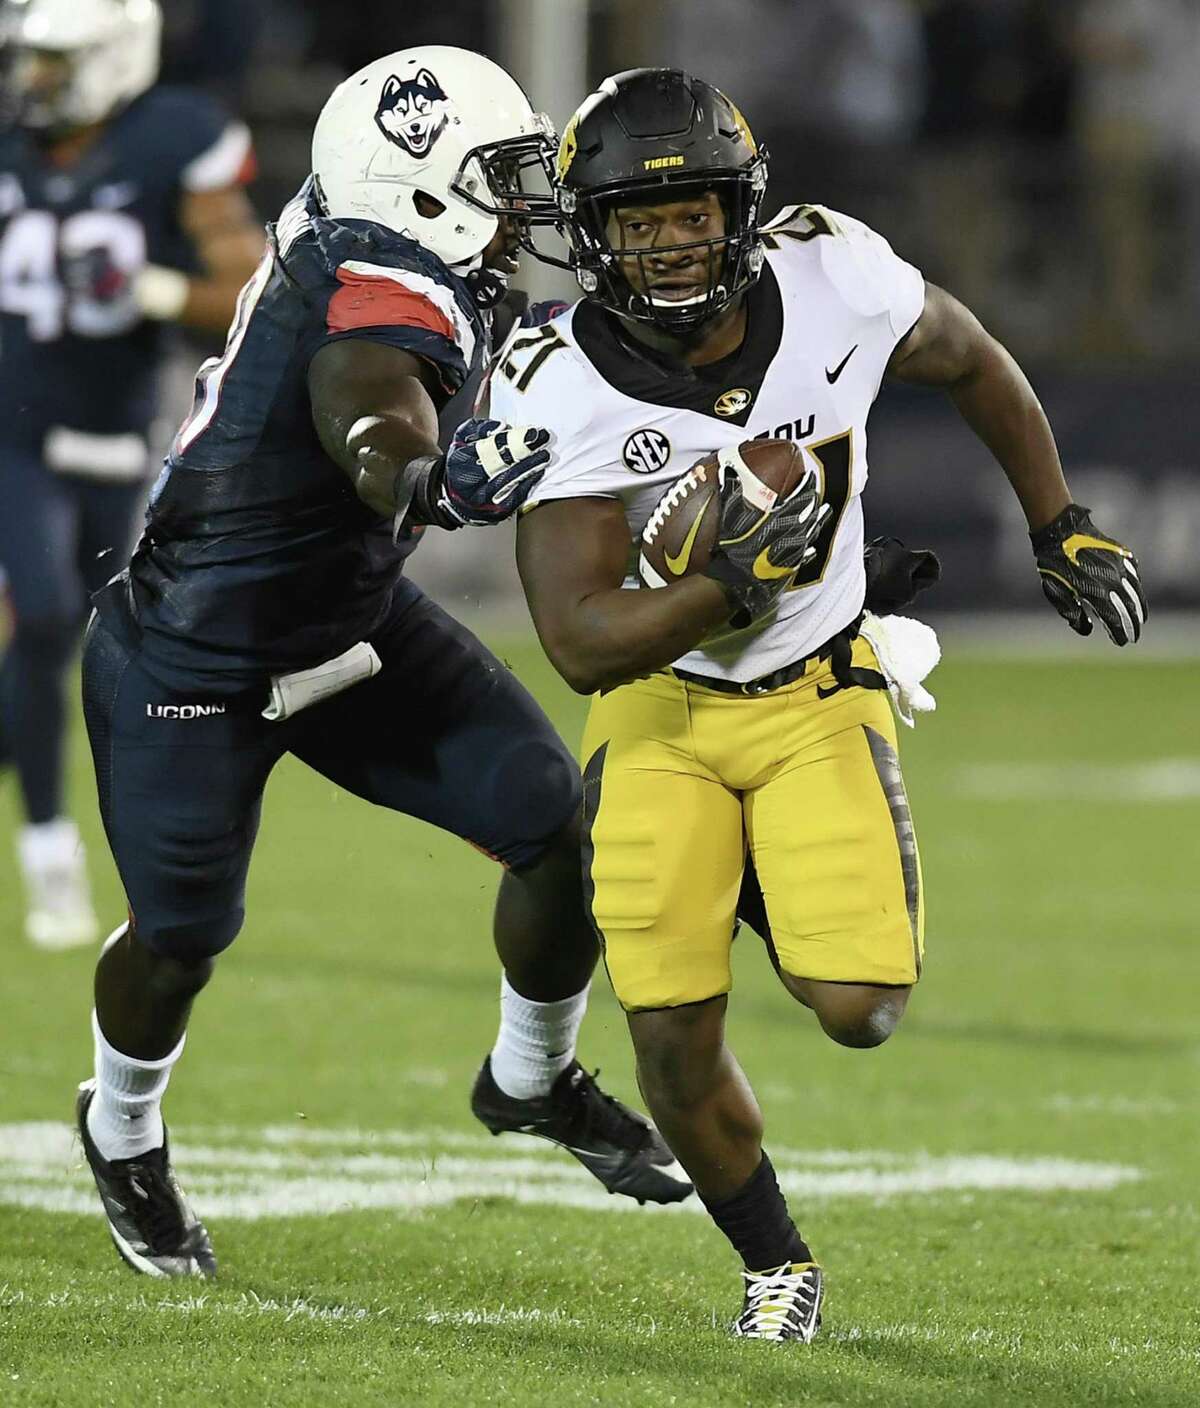 Missouri running back Ish Witter, right, is pursued by Connecticut linebacker Junior Joseph, left, during the first half of an NCAA college football game, Saturday, Oct. 28, 2017, in East Hartford, Conn. (AP Photo/Jessica Hill)